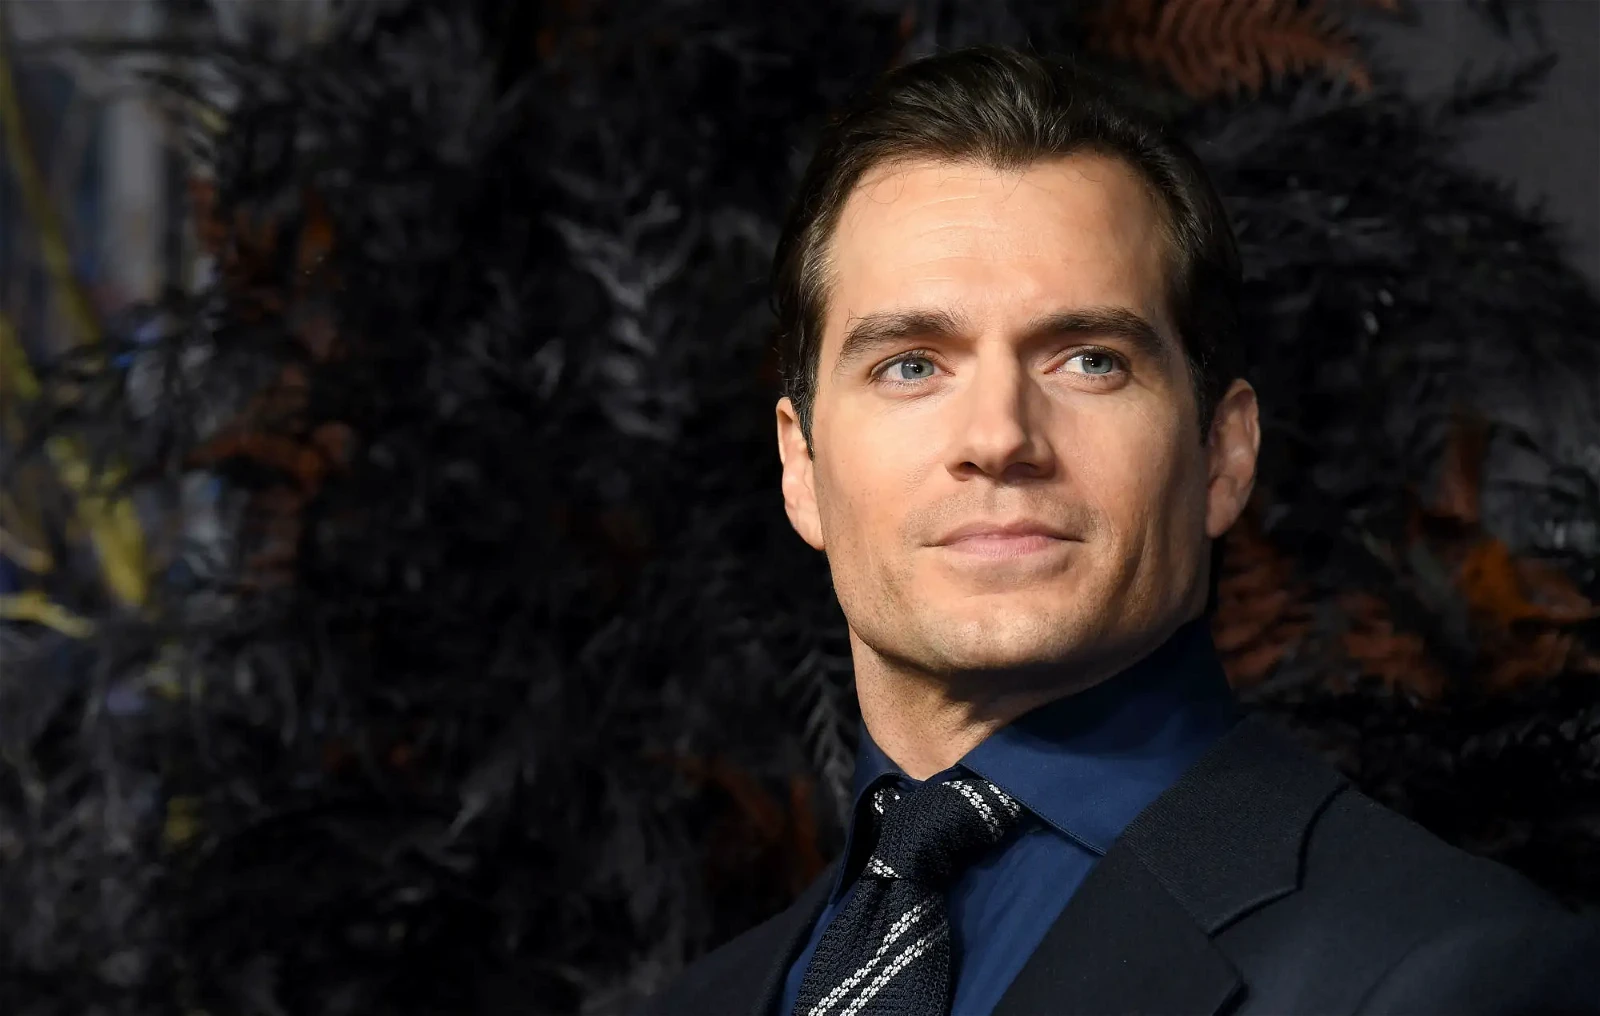 Henry Cavill has one of the best physiques in Hollywood